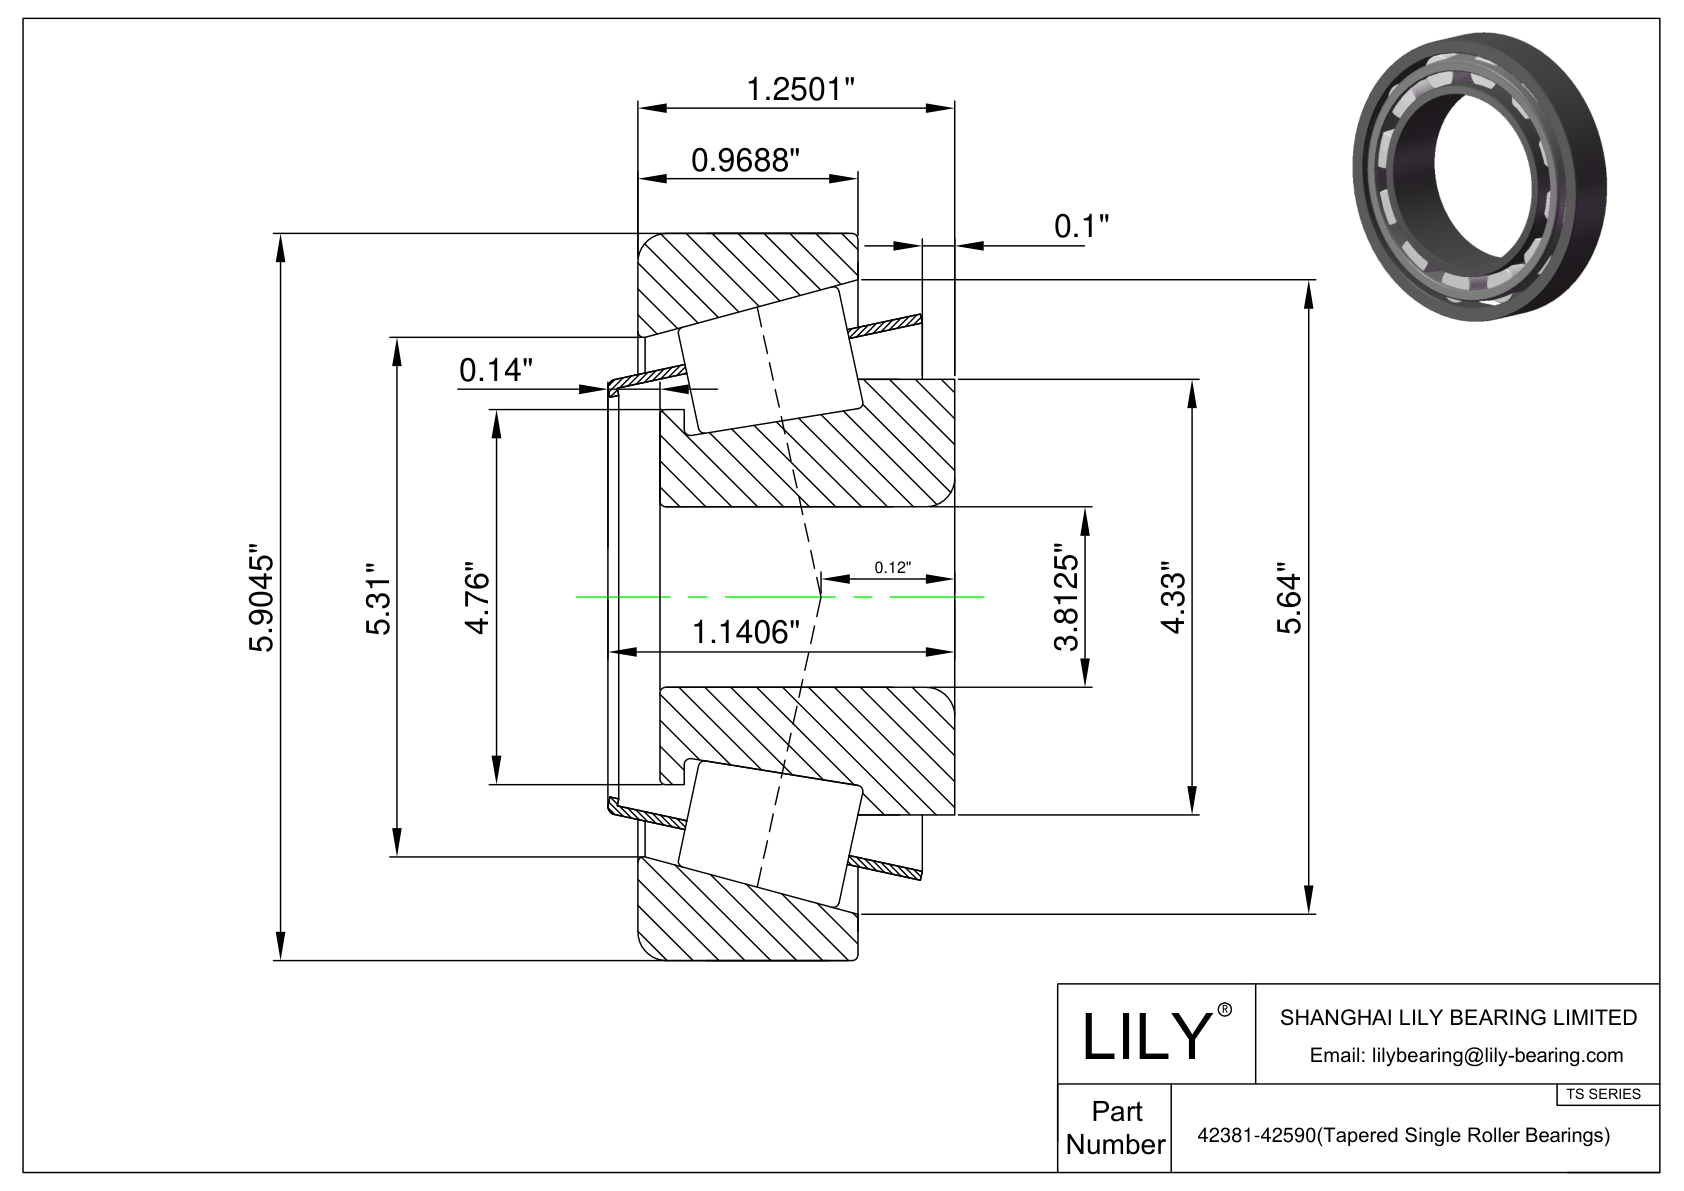 42381-42590 TS (Tapered Single Roller Bearings) (Imperial) cad drawing